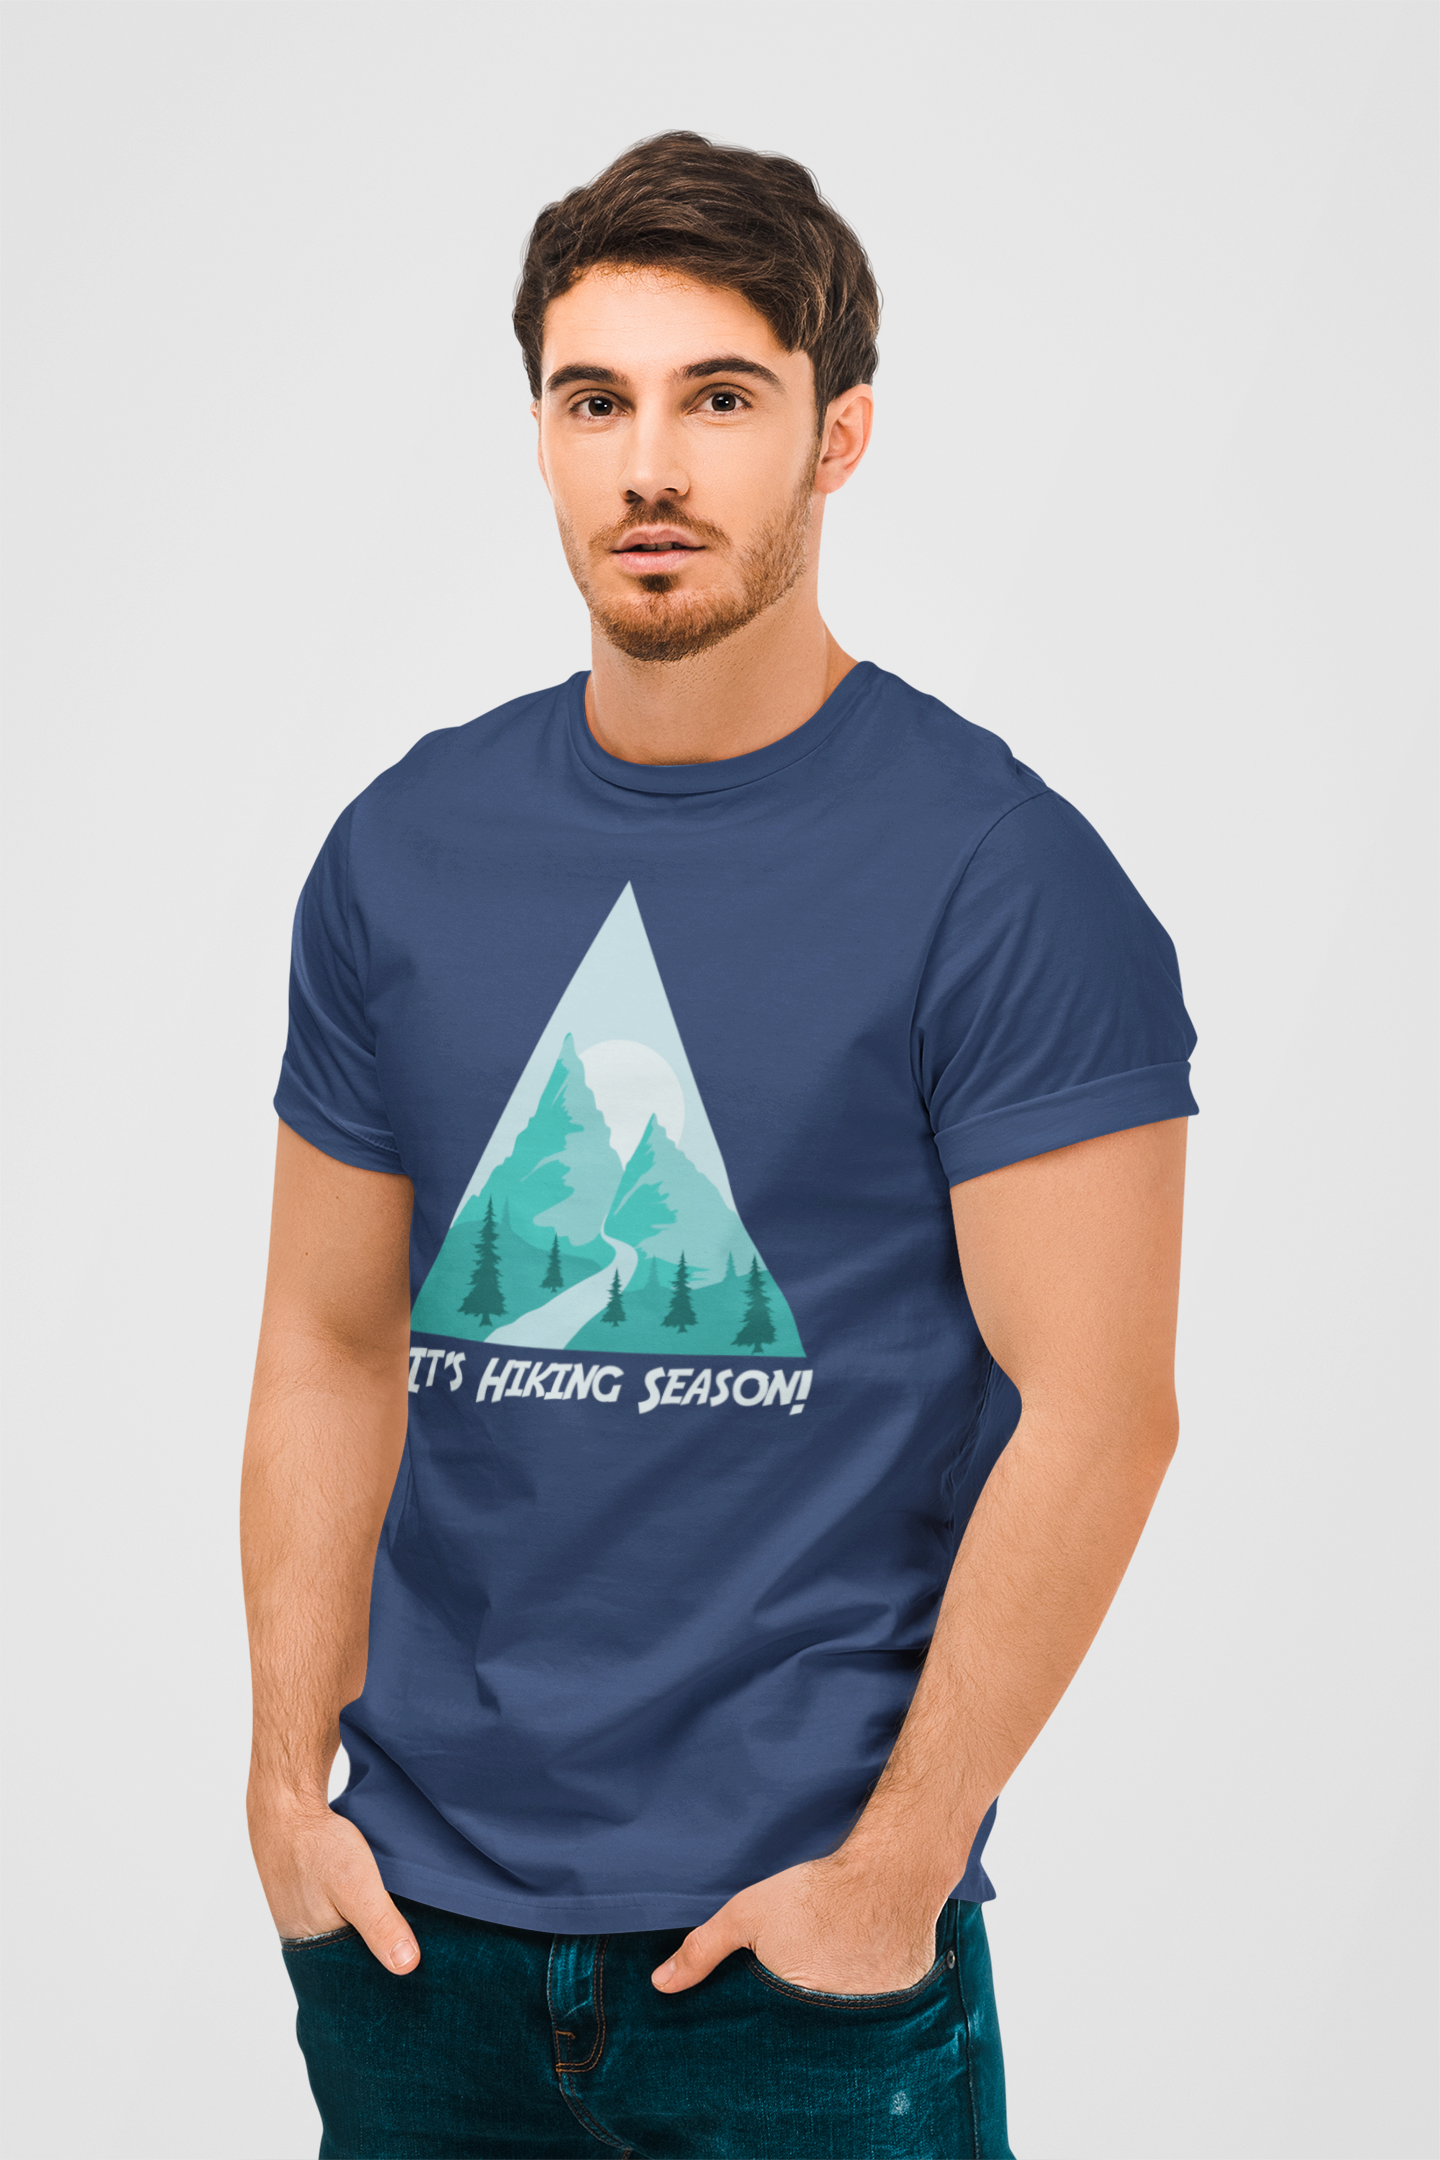 Its A Hiking Season Navy Blue Round Neck T-Shirt for Men